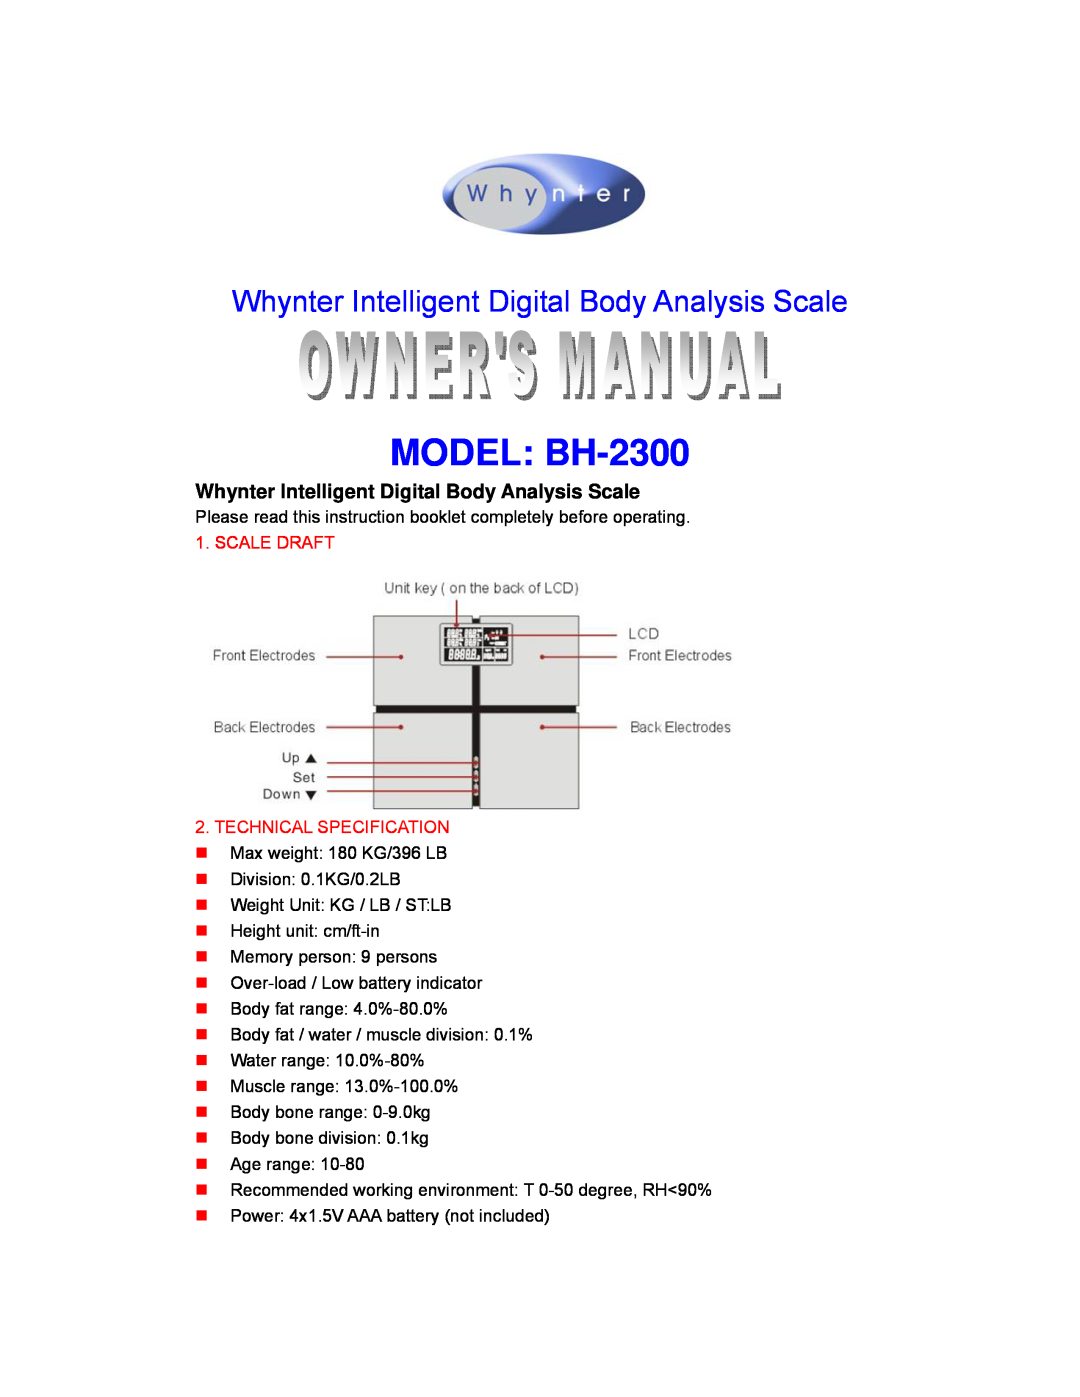 Whynter manual MODEL BH-2300, Whynter Intelligent Digital Body Analysis Scale, Scale Draft 